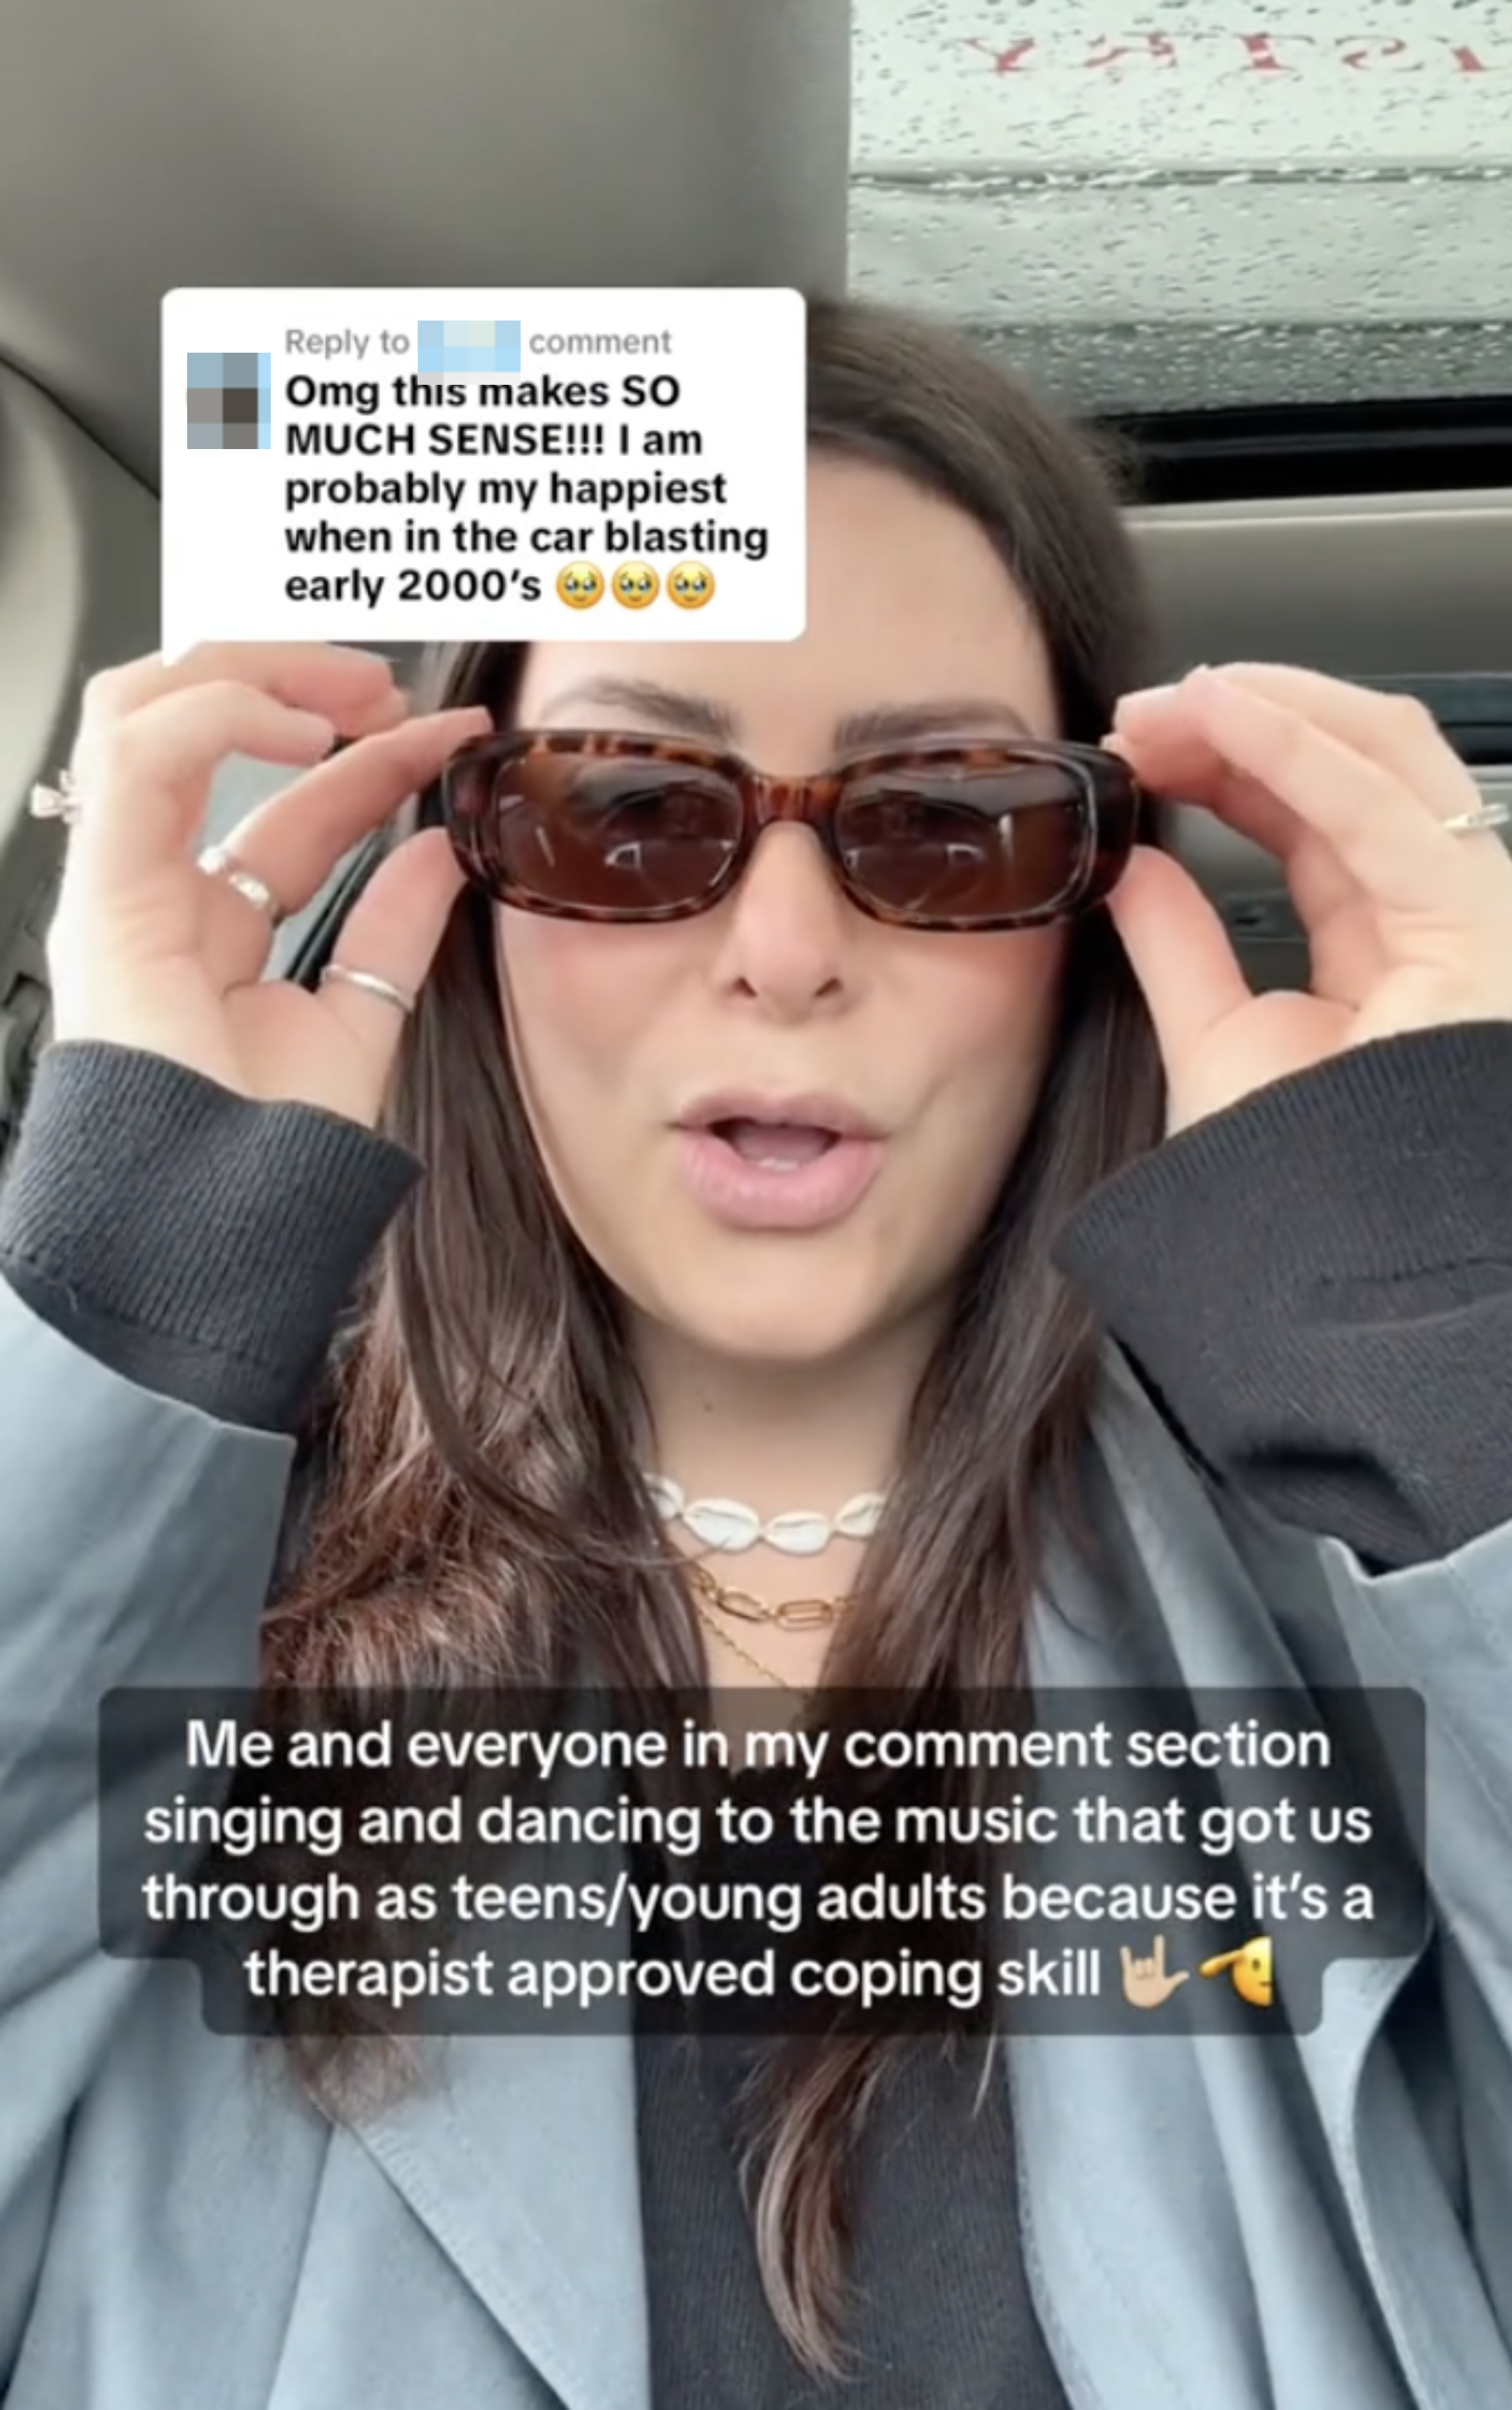 Nikki in her car putting on sunglasses, reacting to comment about music from early 2000s being therapeutic